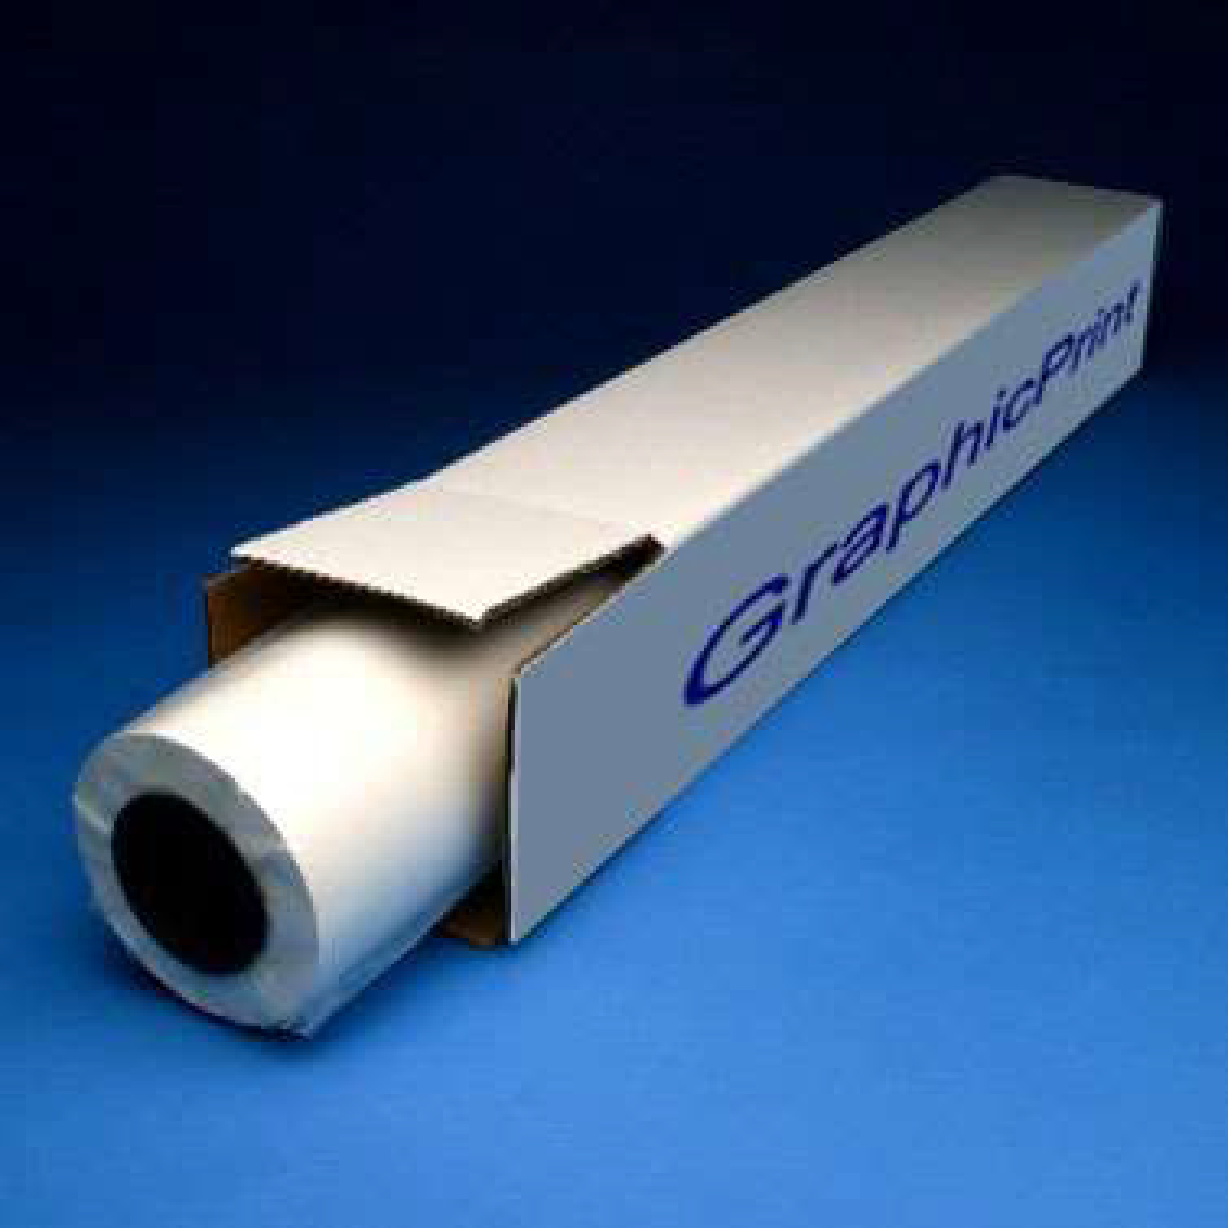 A roll of white paper on a blue background.